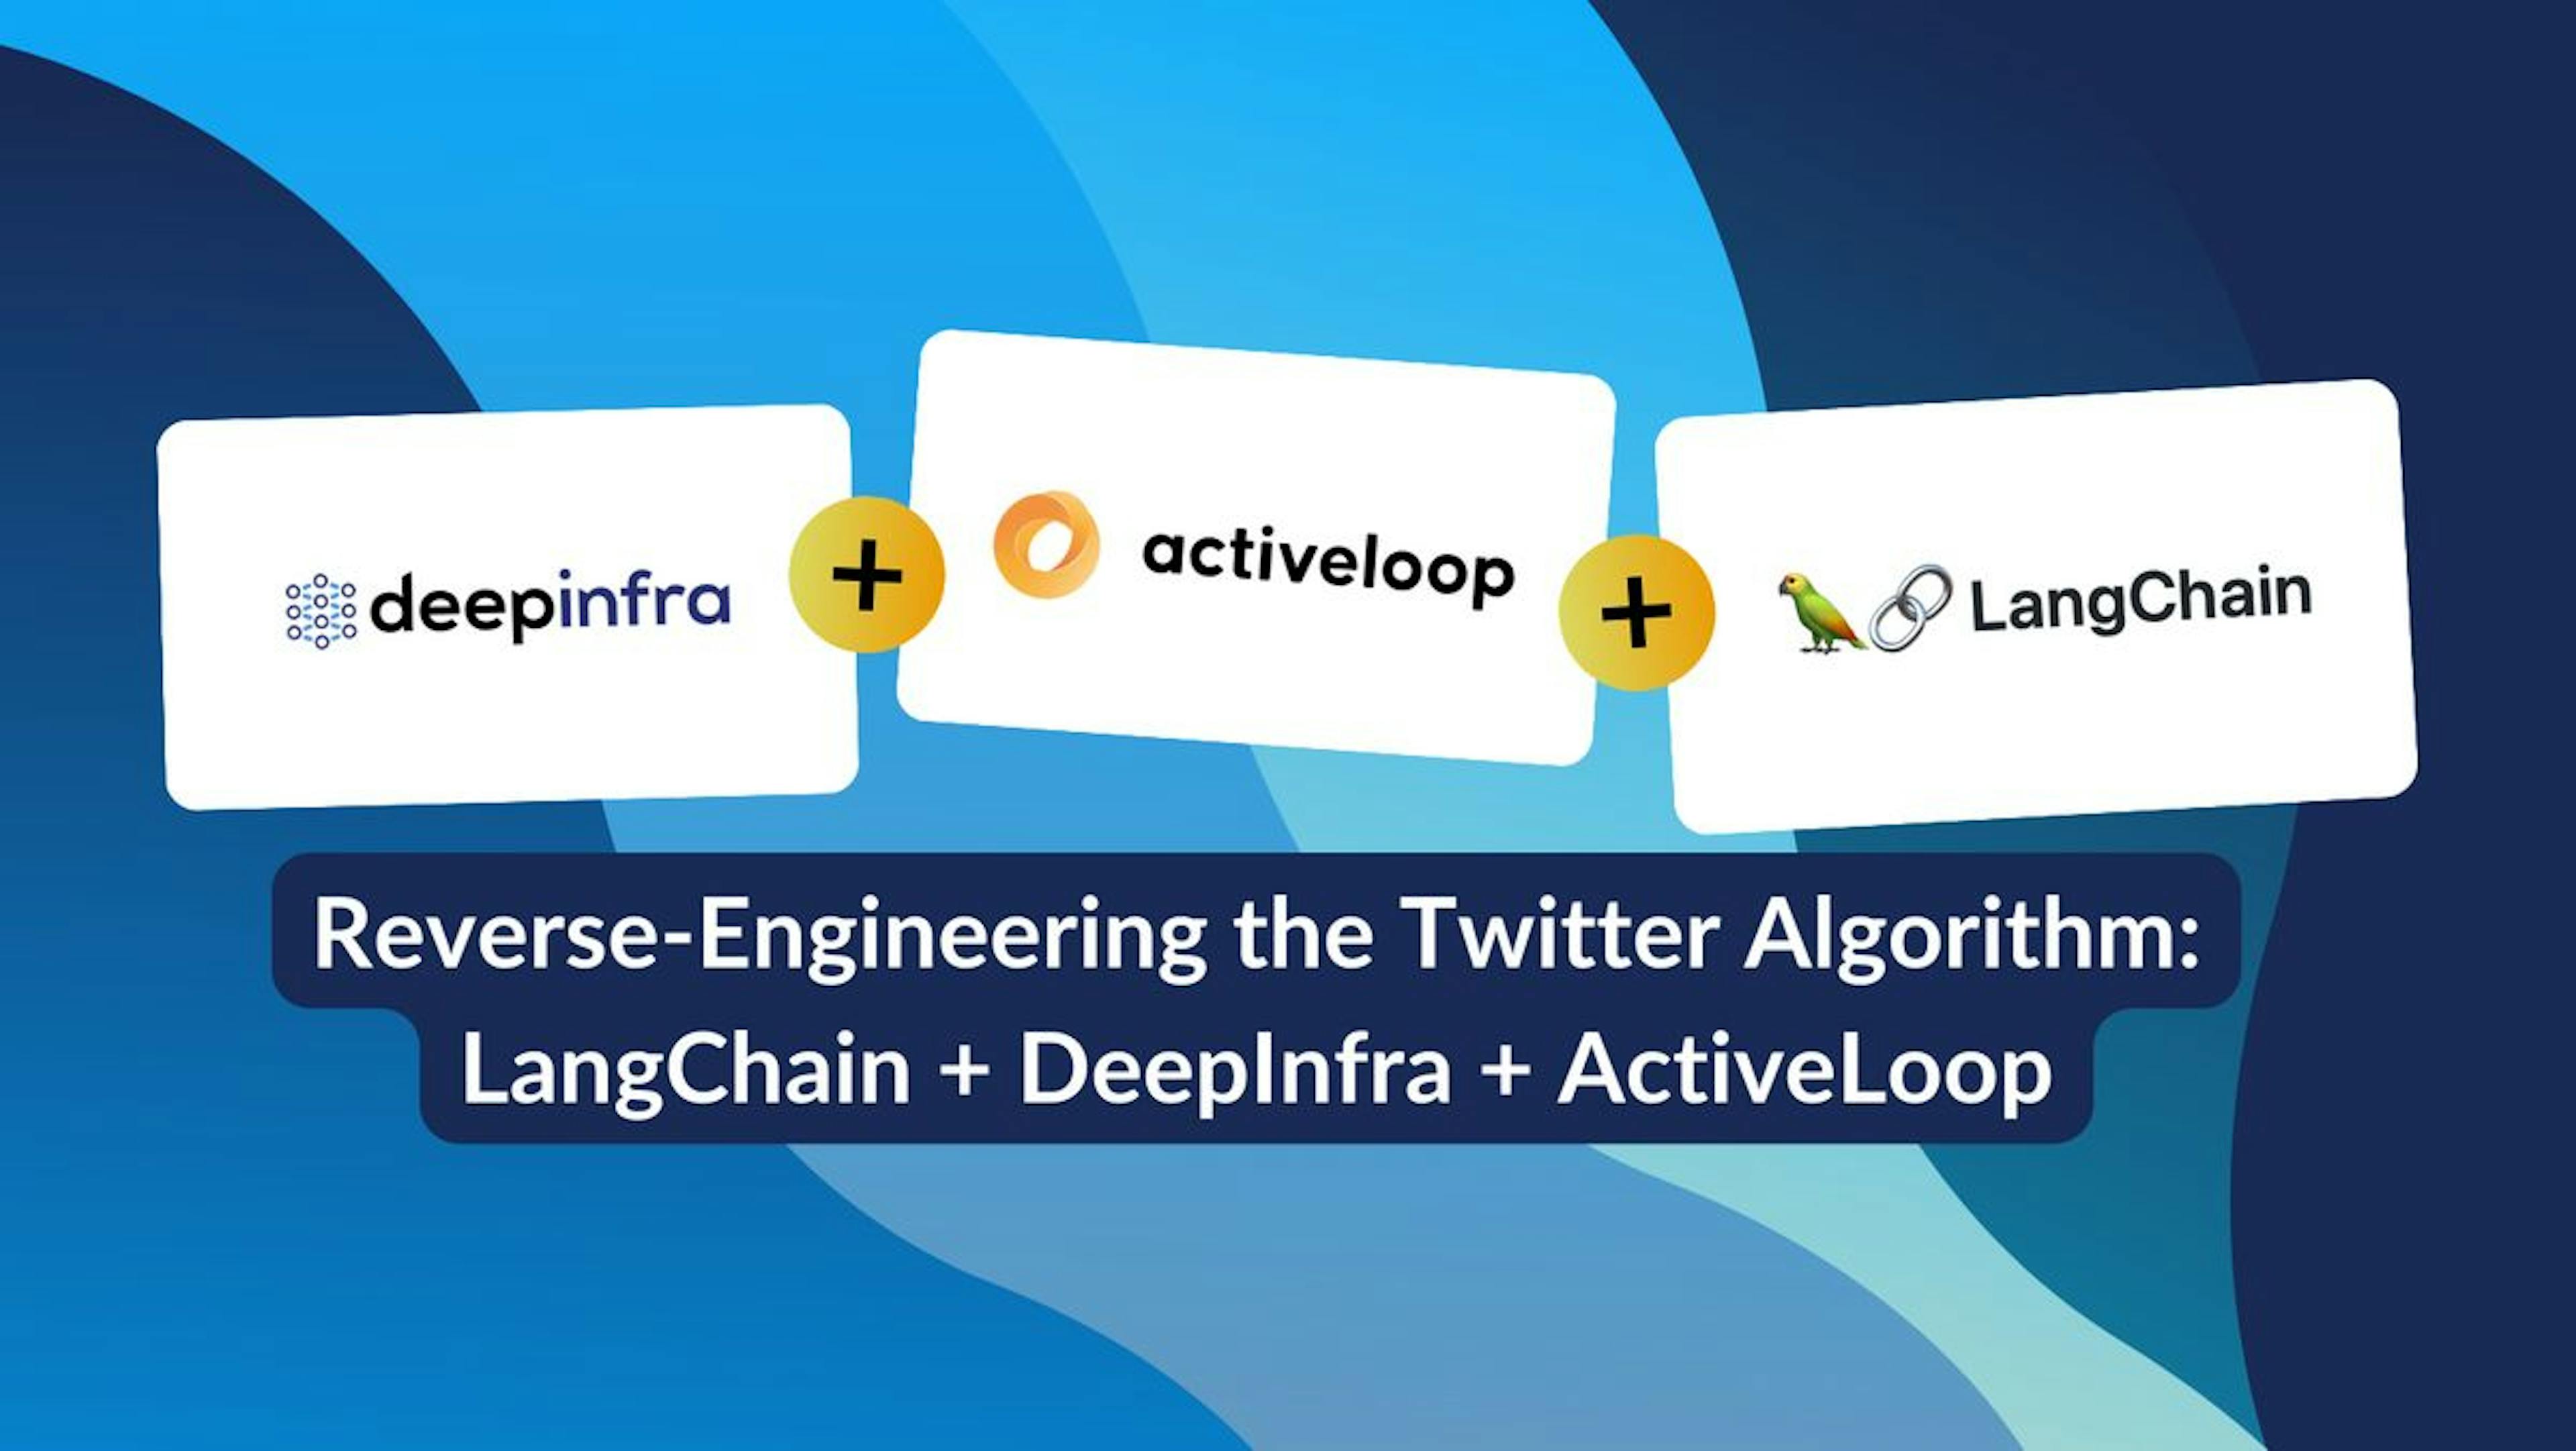 featured image - What The Tweet? Reverse-Engineering the Twitter Algorithm with LangChain